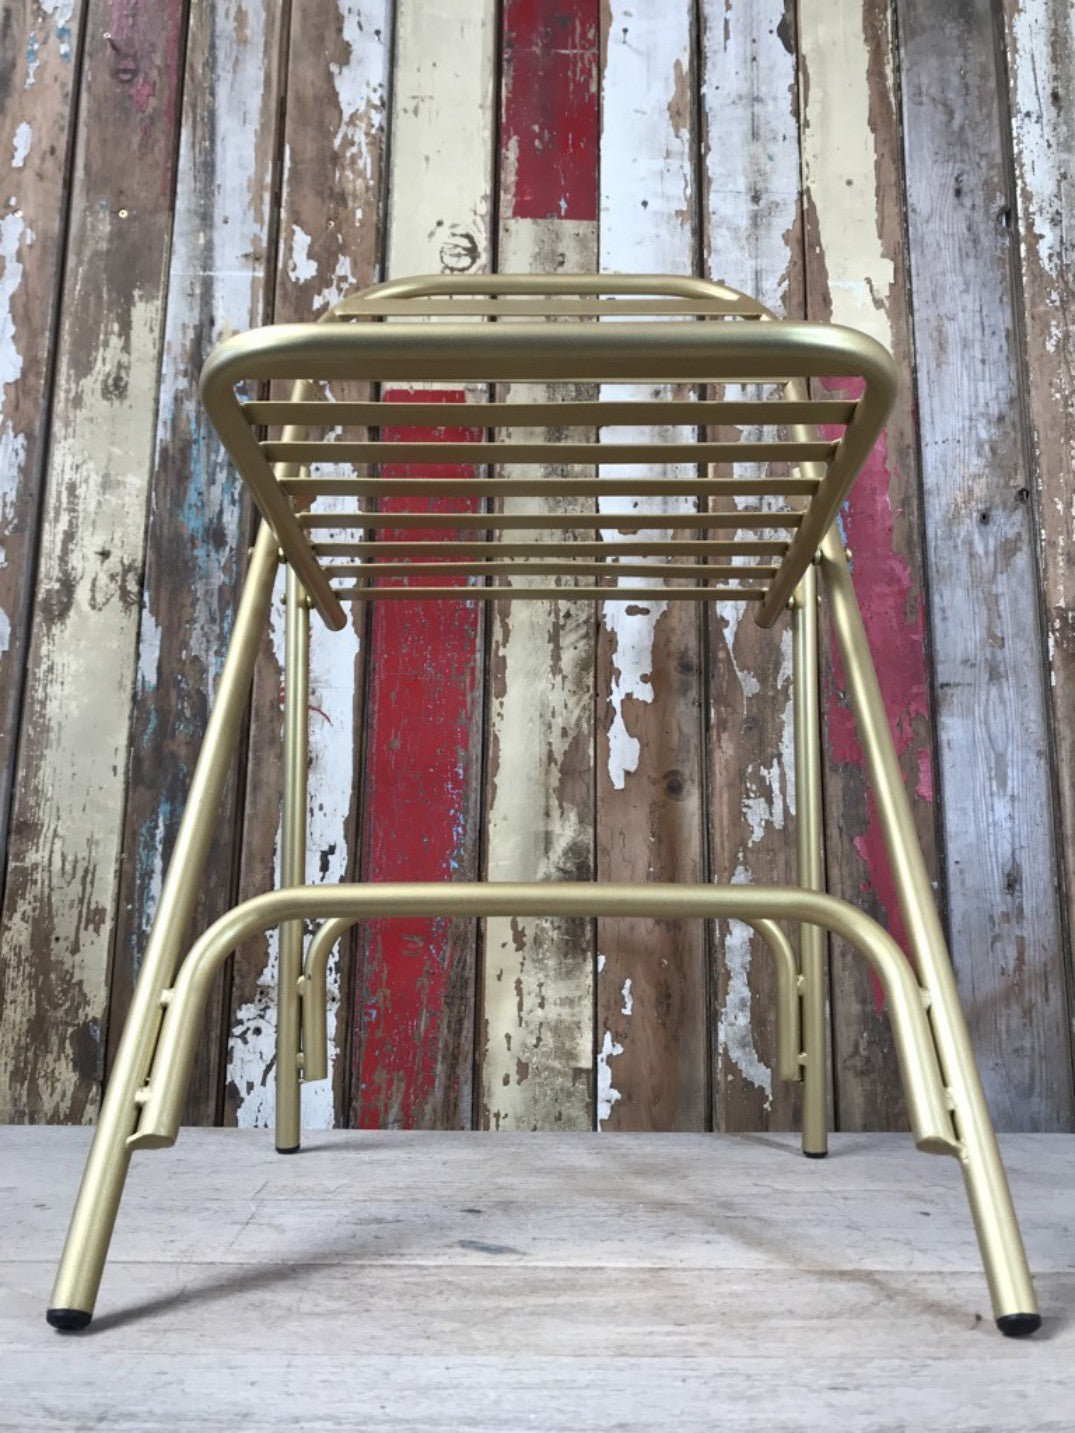 Gold Colour Steel Strong & Sturdy Foldable Chair New Indoor or outdoor